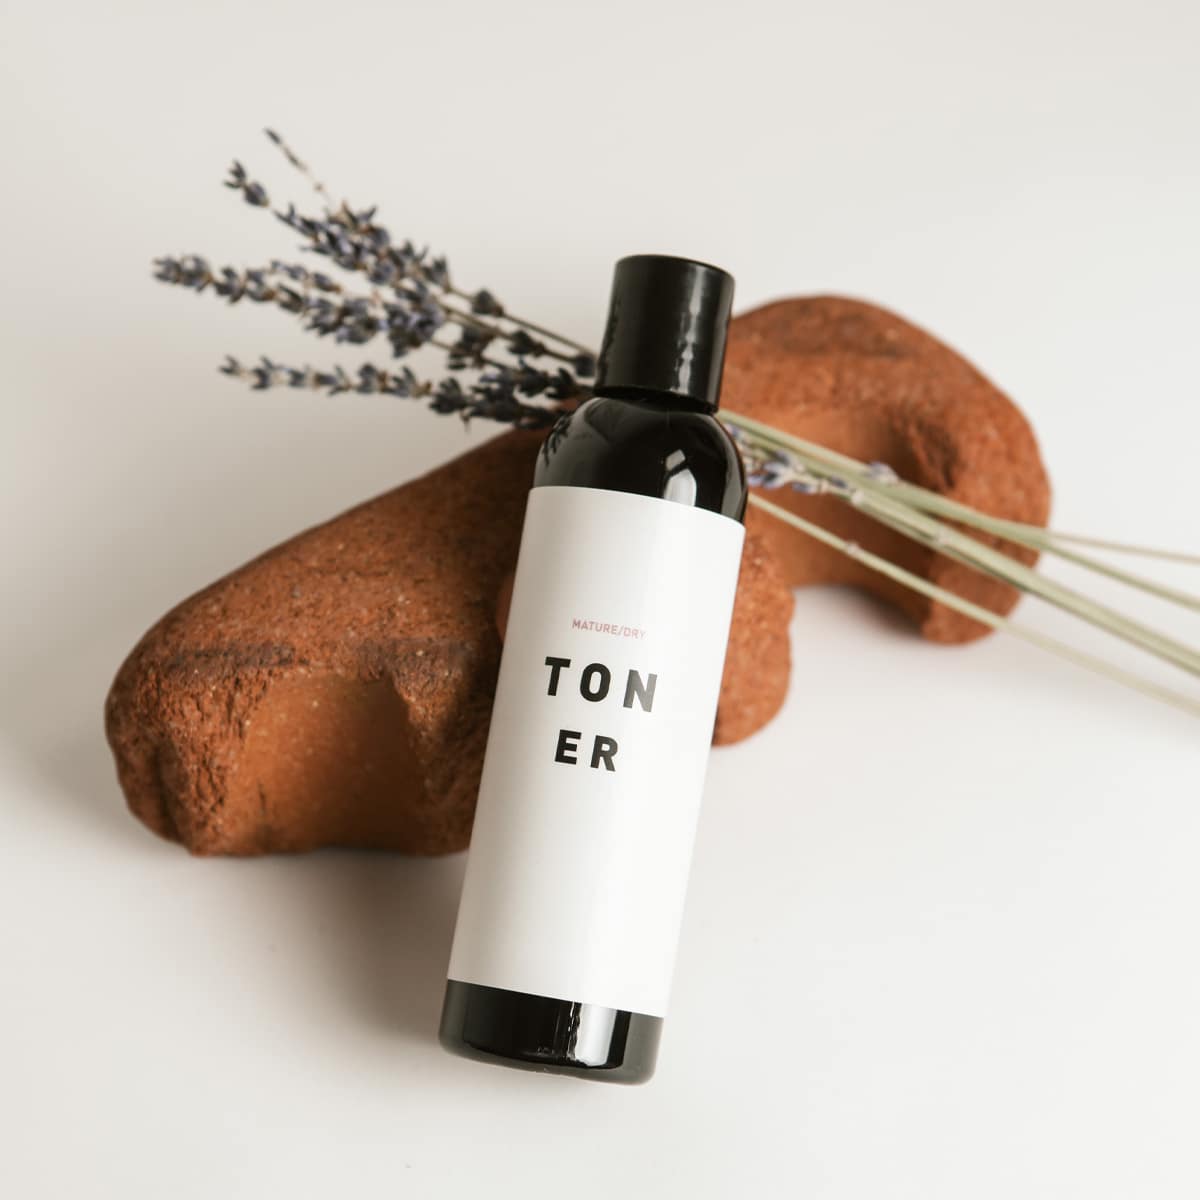 Way of Will’s natural, skin-loving toner is uniquely formulated to nourish mature and dry skin types while setting the tone for the rest of your skin care routine. Made from neroli and sea buckthorn extract, this toner effortlessly minimizes the appearance